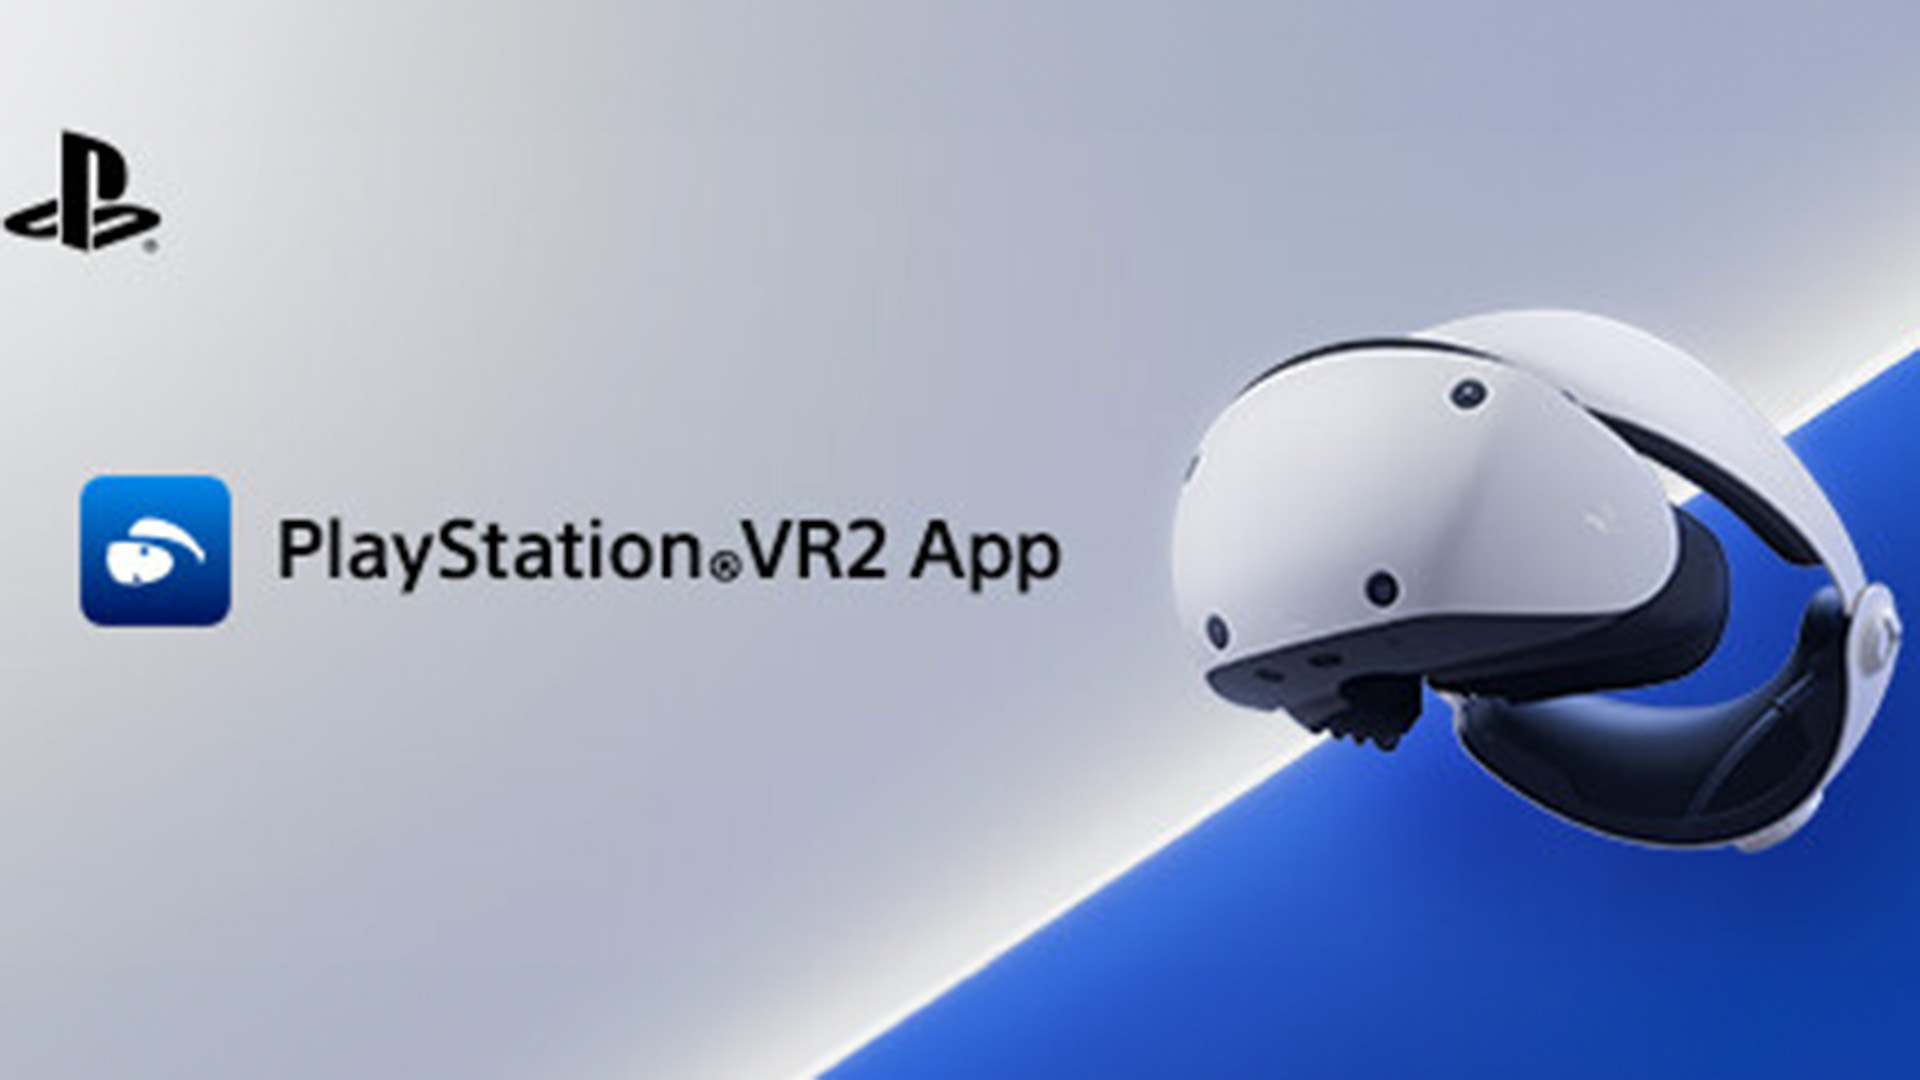  An official app for PS VR2 on PC has just been listed on Steam 